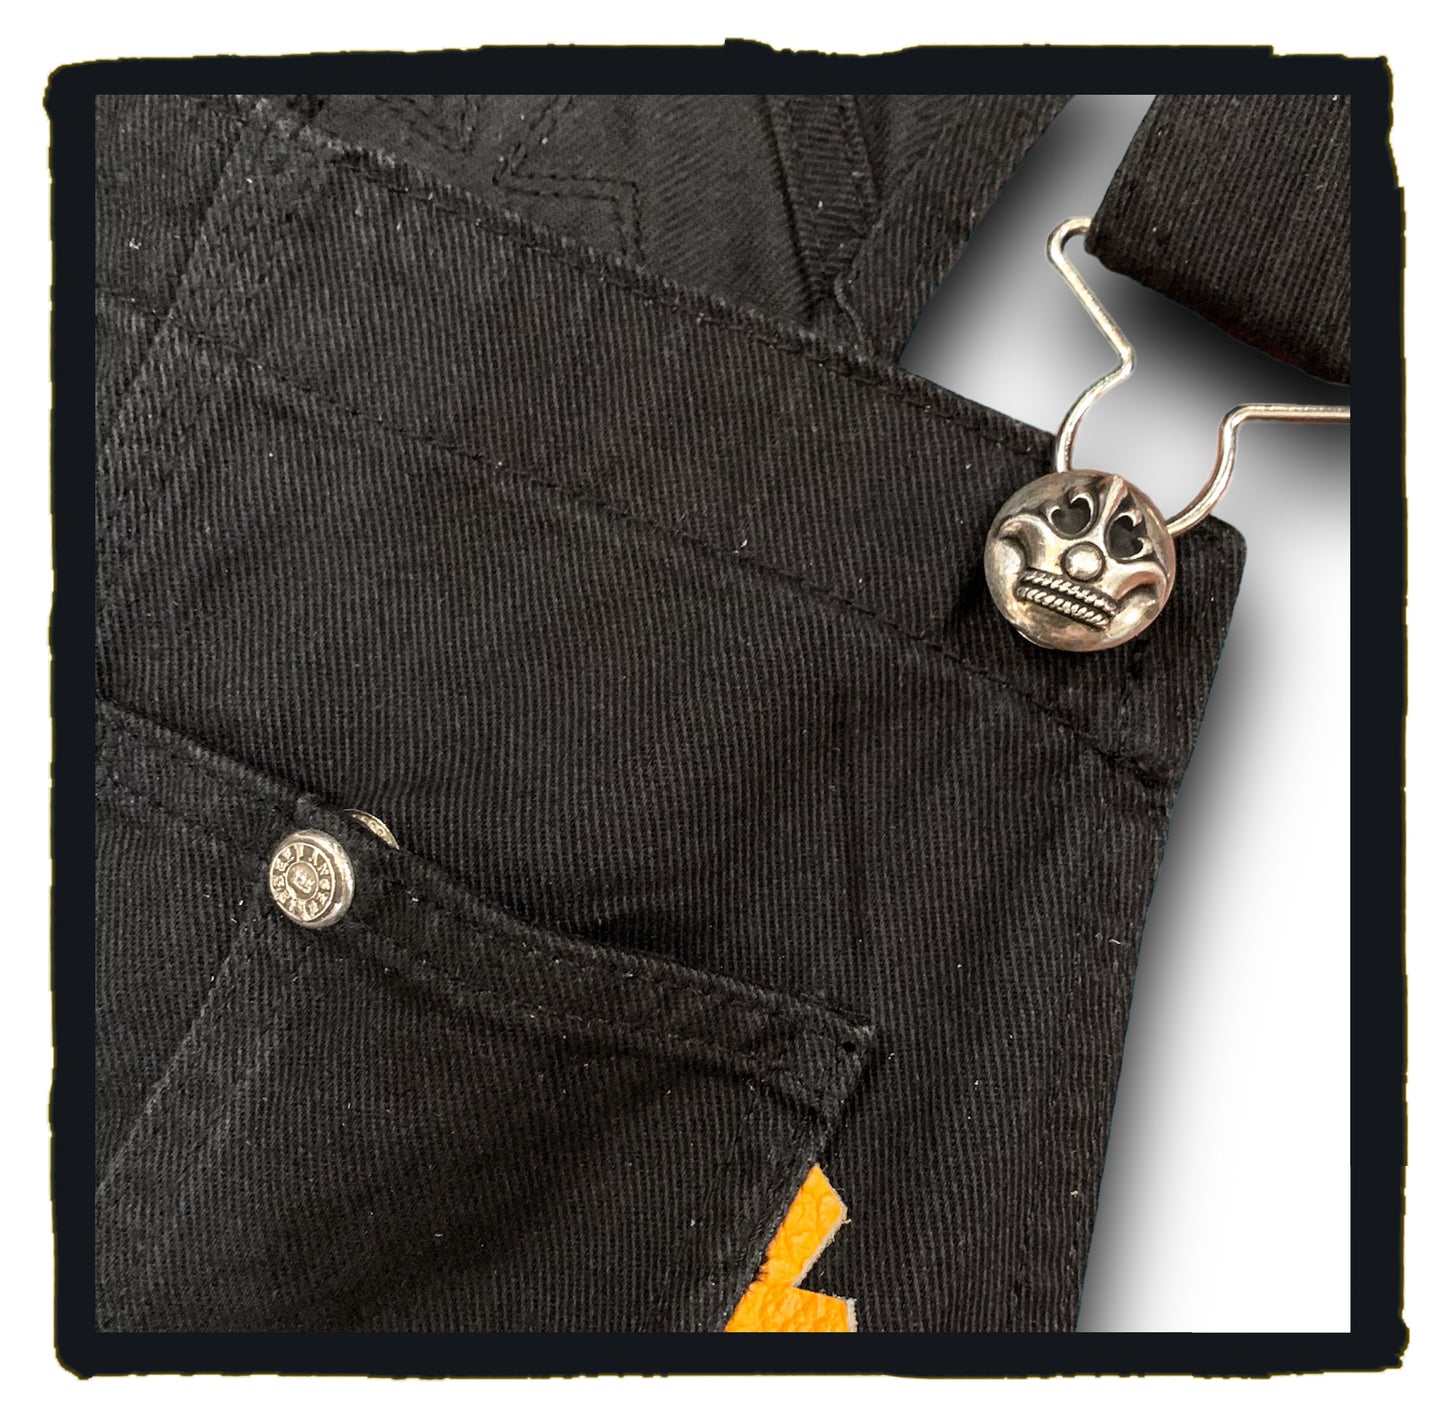 bespoke - denim overall with leather cross patch & sterling silver parts 2023 08